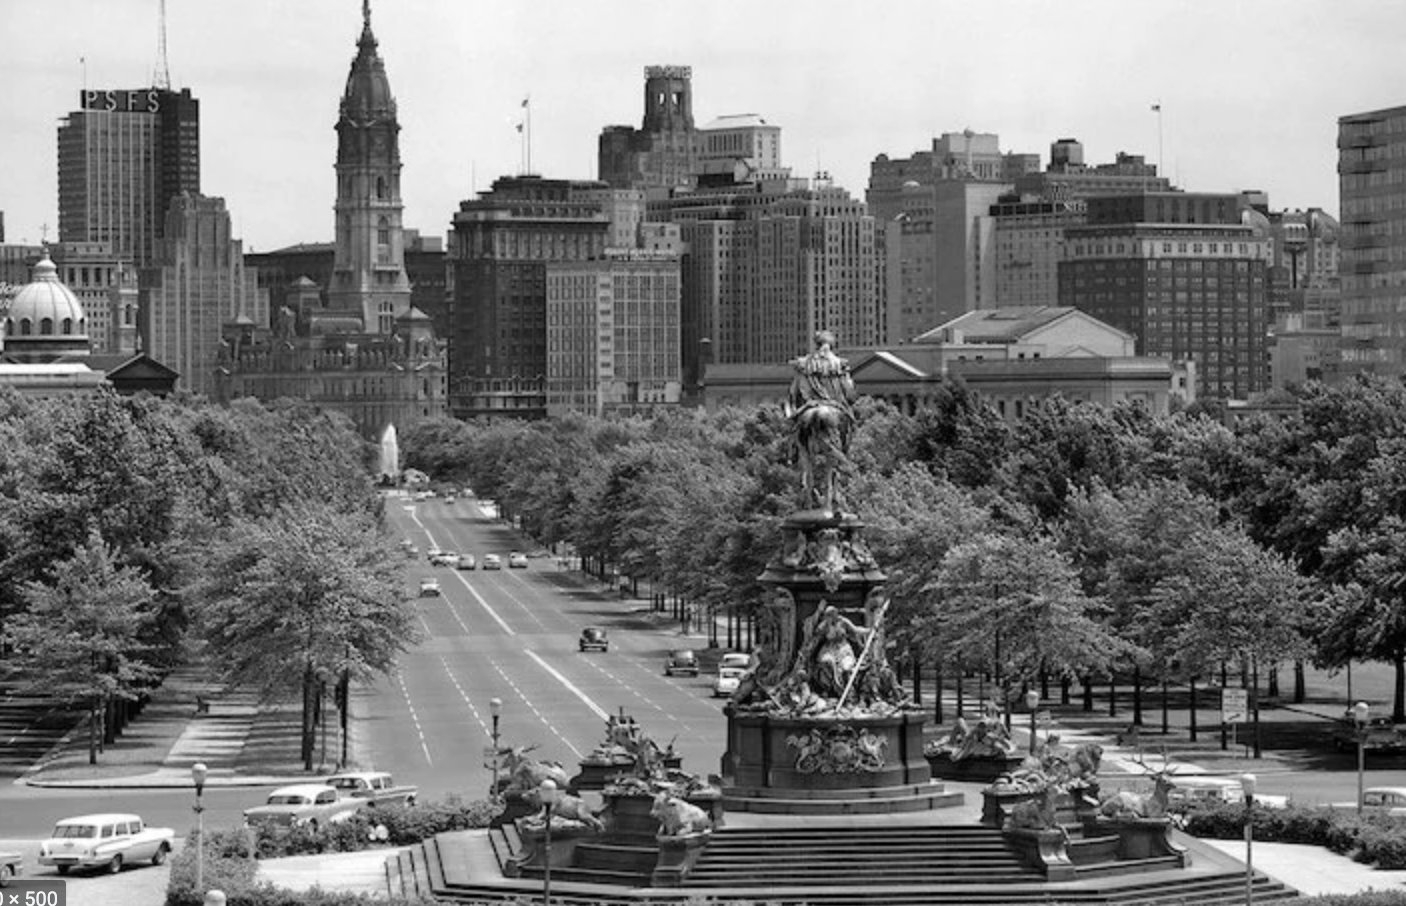 '1950s Benjamin Franklin Parkway Looking Southwest from Art Museum Past Eakins to Logan Circle to City Hall Philadelphia Pa USA' Photographic Print on Wrapped Canvas - Image 0